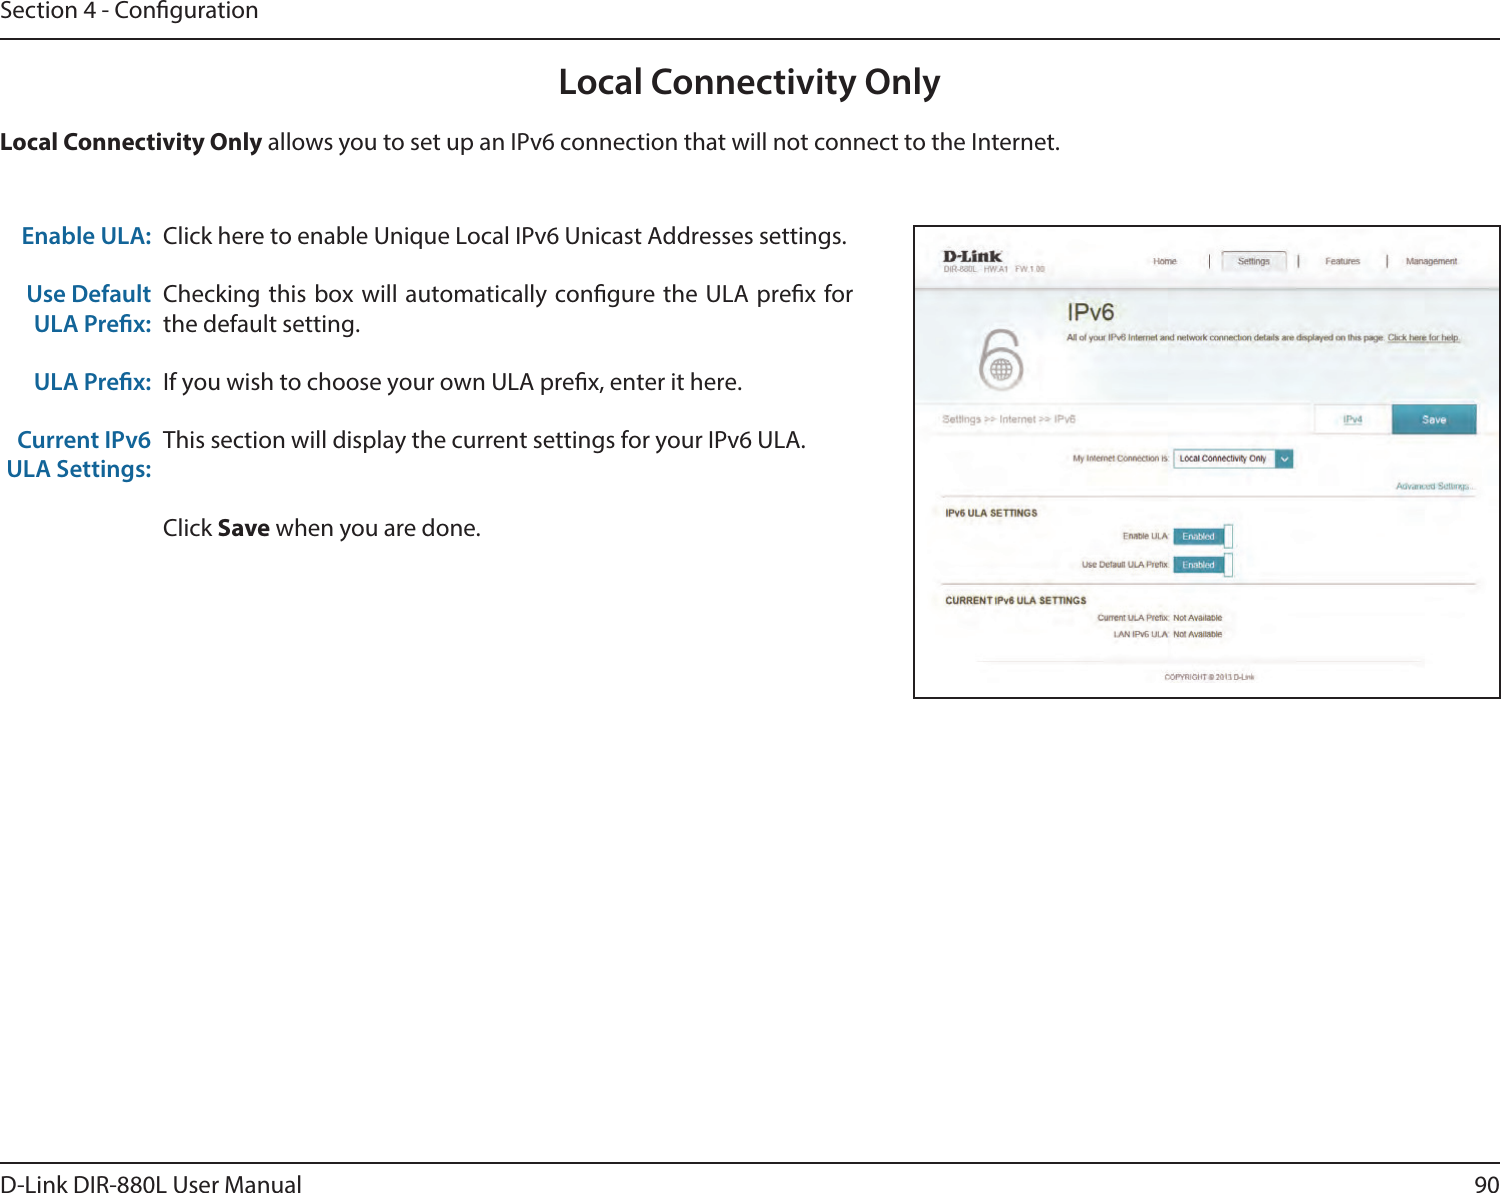 90D-Link DIR-880L User ManualSection 4 - CongurationLocal Connectivity OnlyClick here to enable Unique Local IPv6 Unicast Addresses settings.Checking this box will automatically congure the ULA prex for the default setting.If you wish to choose your own ULA prex, enter it here.This section will display the current settings for your IPv6 ULA.Click Save when you are done.Enable ULA:Use Default ULA Prex:ULA Prex:Current IPv6 ULA Settings:Local Connectivity Only allows you to set up an IPv6 connection that will not connect to the Internet.